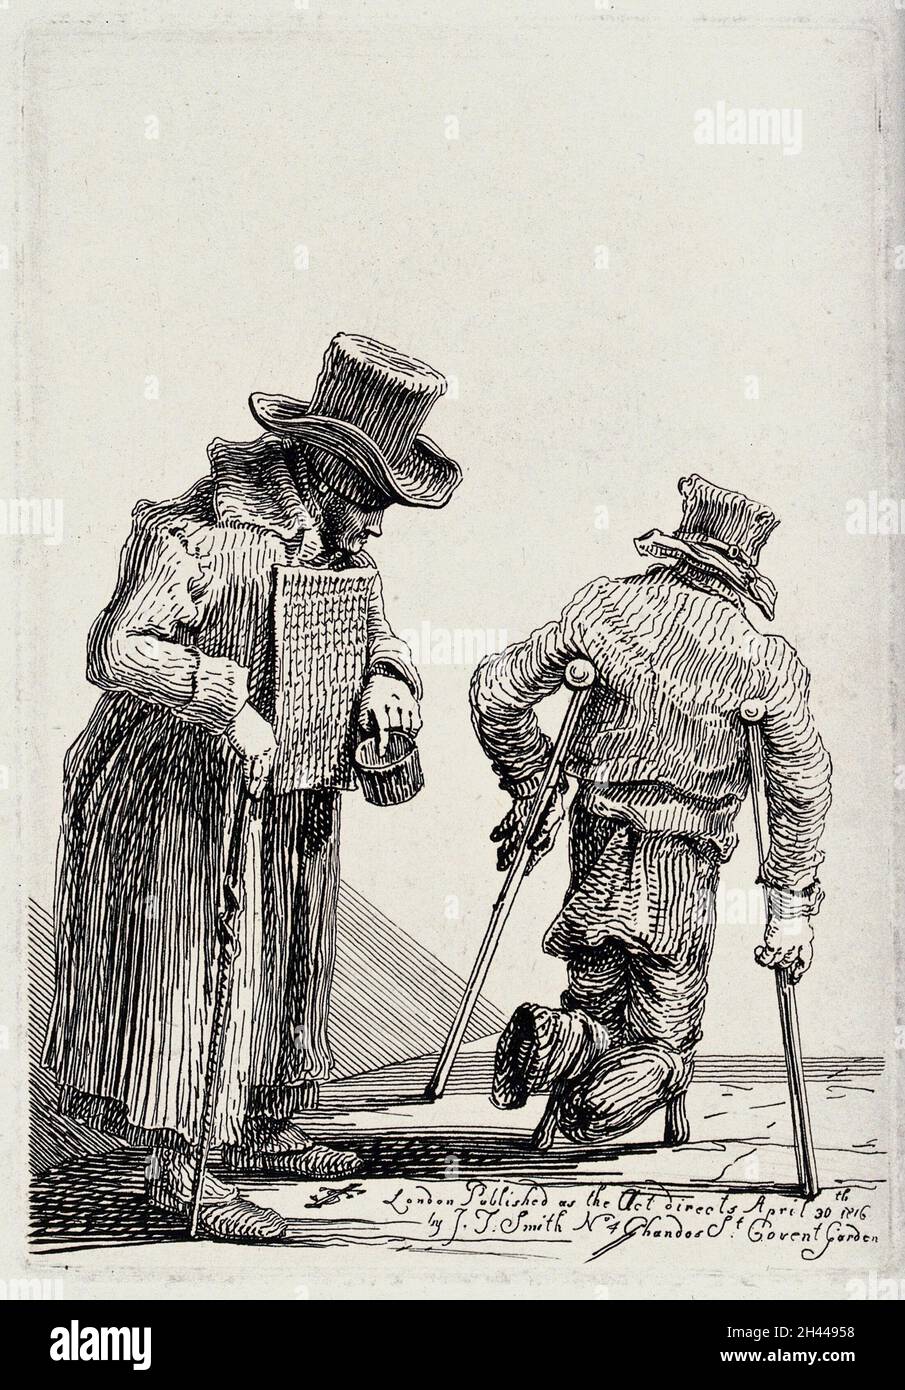 A beggar wearing a placard around his neck checks the contents of his collecting tin while a beggar with two amputated feet moves past with the aid of two crutches and stumps. Etching by J.T. Smith, 1816. Stock Photo